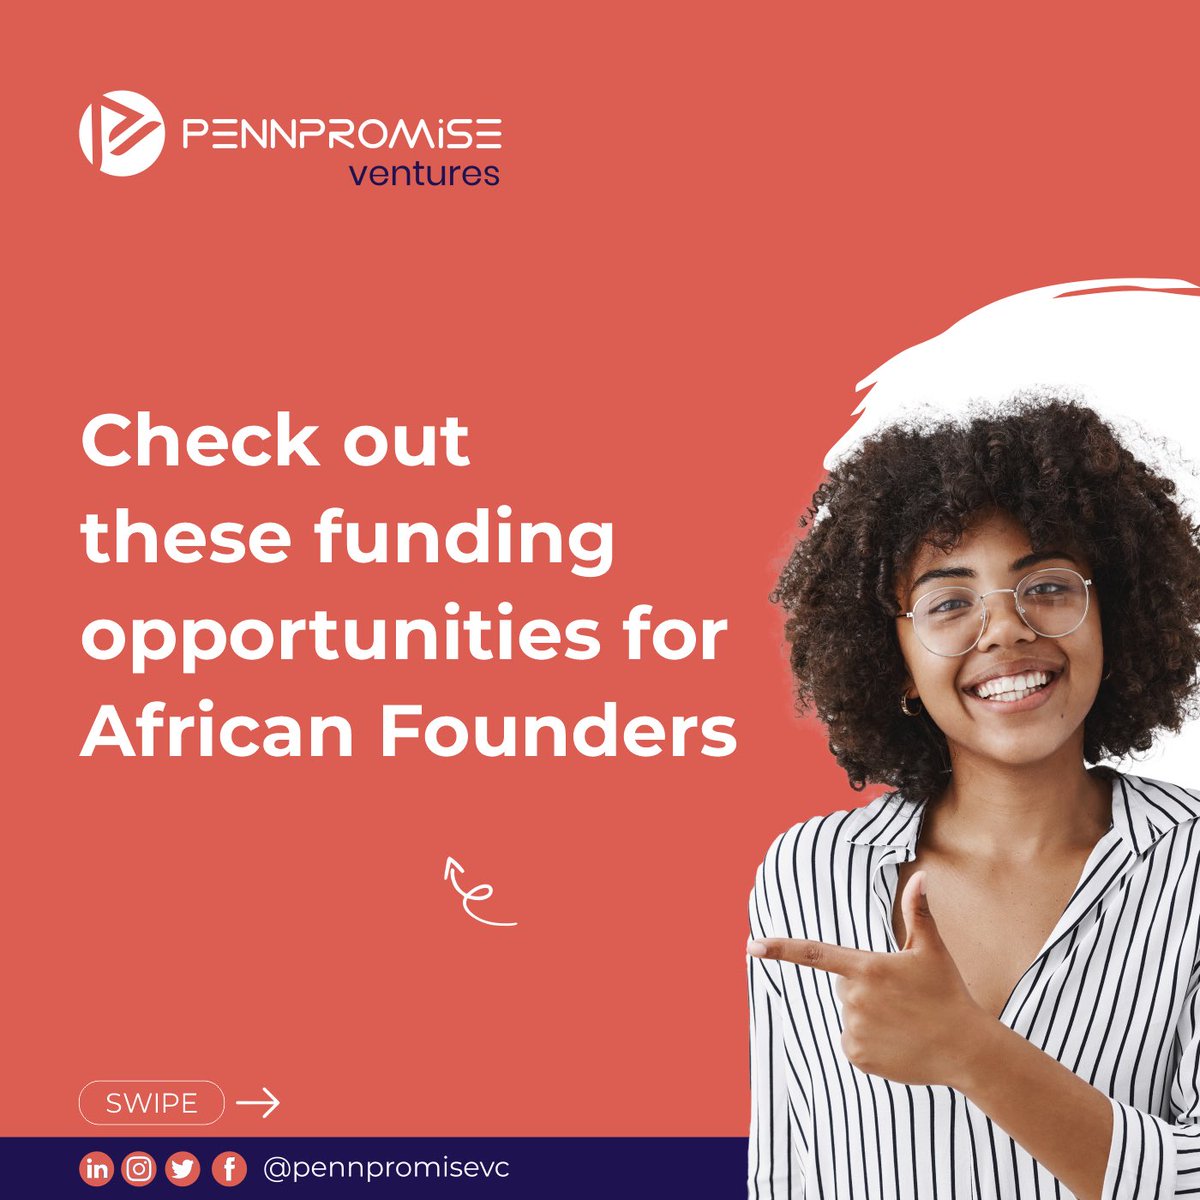 Calling all African Founders! ✨ Explore exciting funding opportunities that can take your venture to new heights.#AfricanFounders #FundingOpportunities #VentureStudio #PennPromise